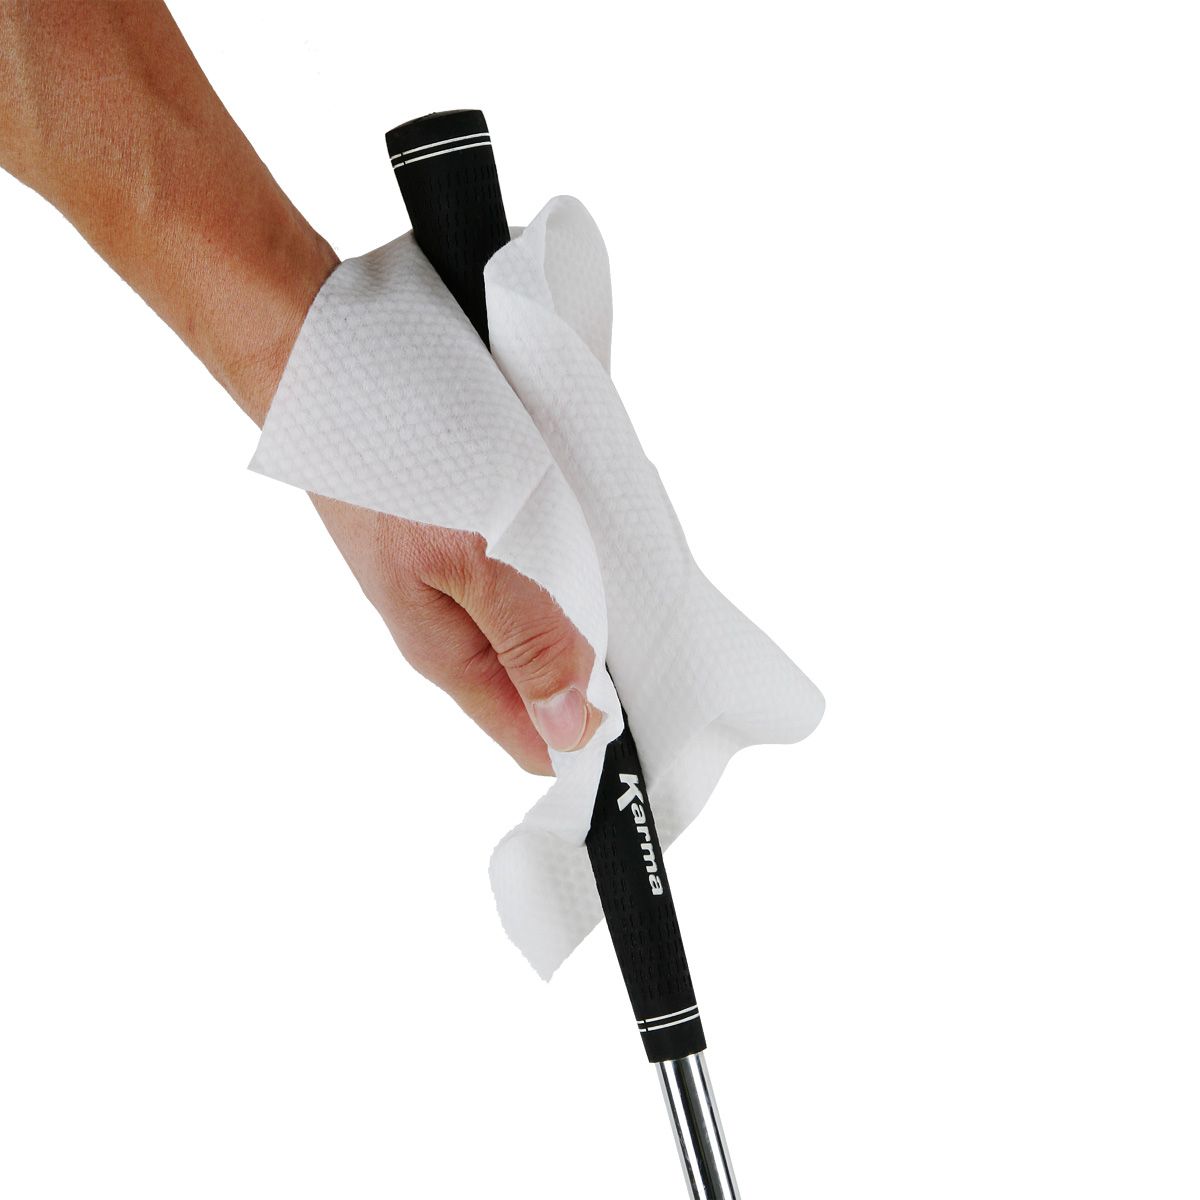 person wiping a Karma golf grip with a Karma Grip Cleaning Wipe